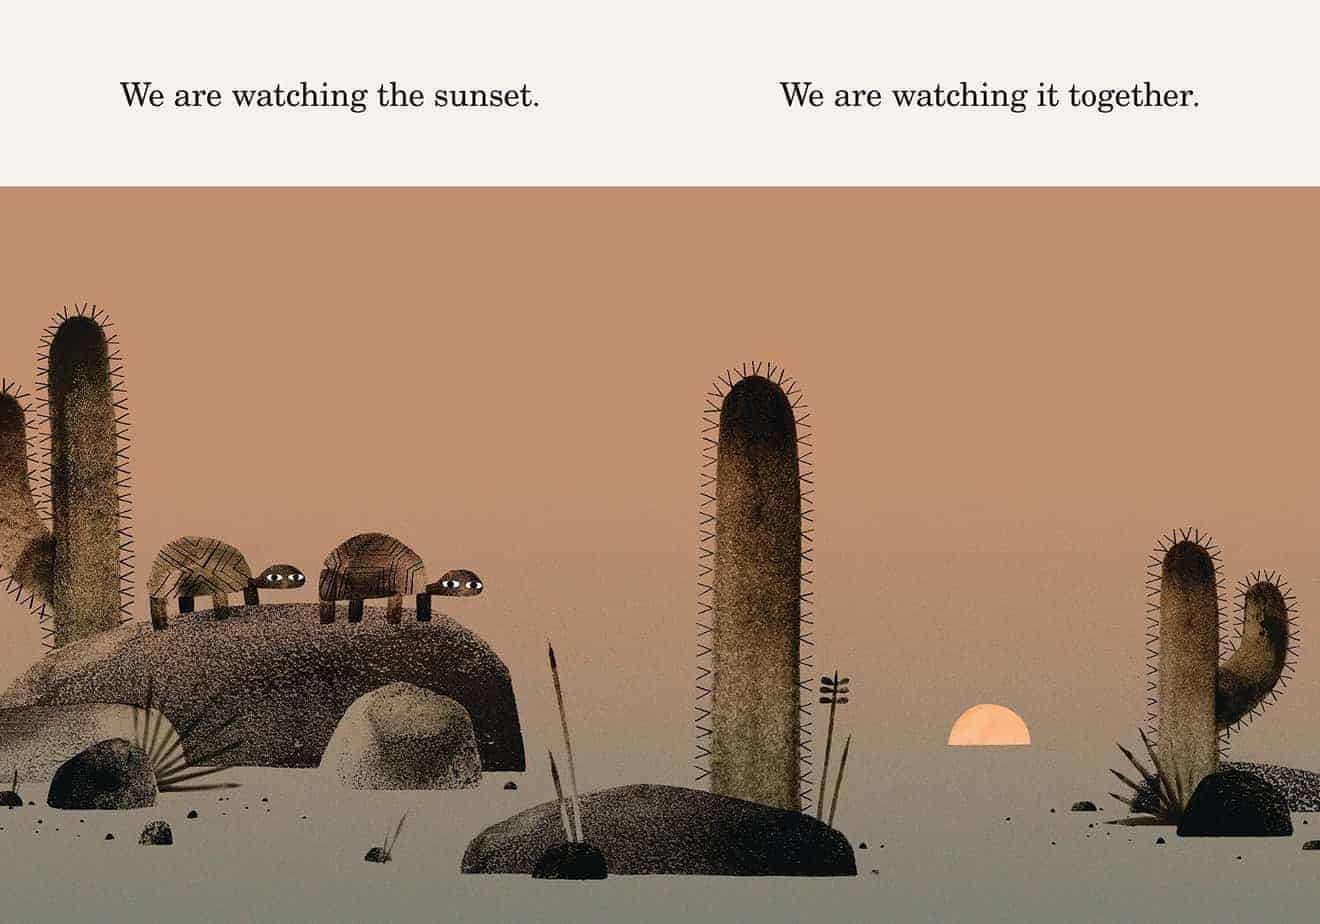 From We Found A Hat by Jon Klassen. "We are watching the sunset. We are watching it together."